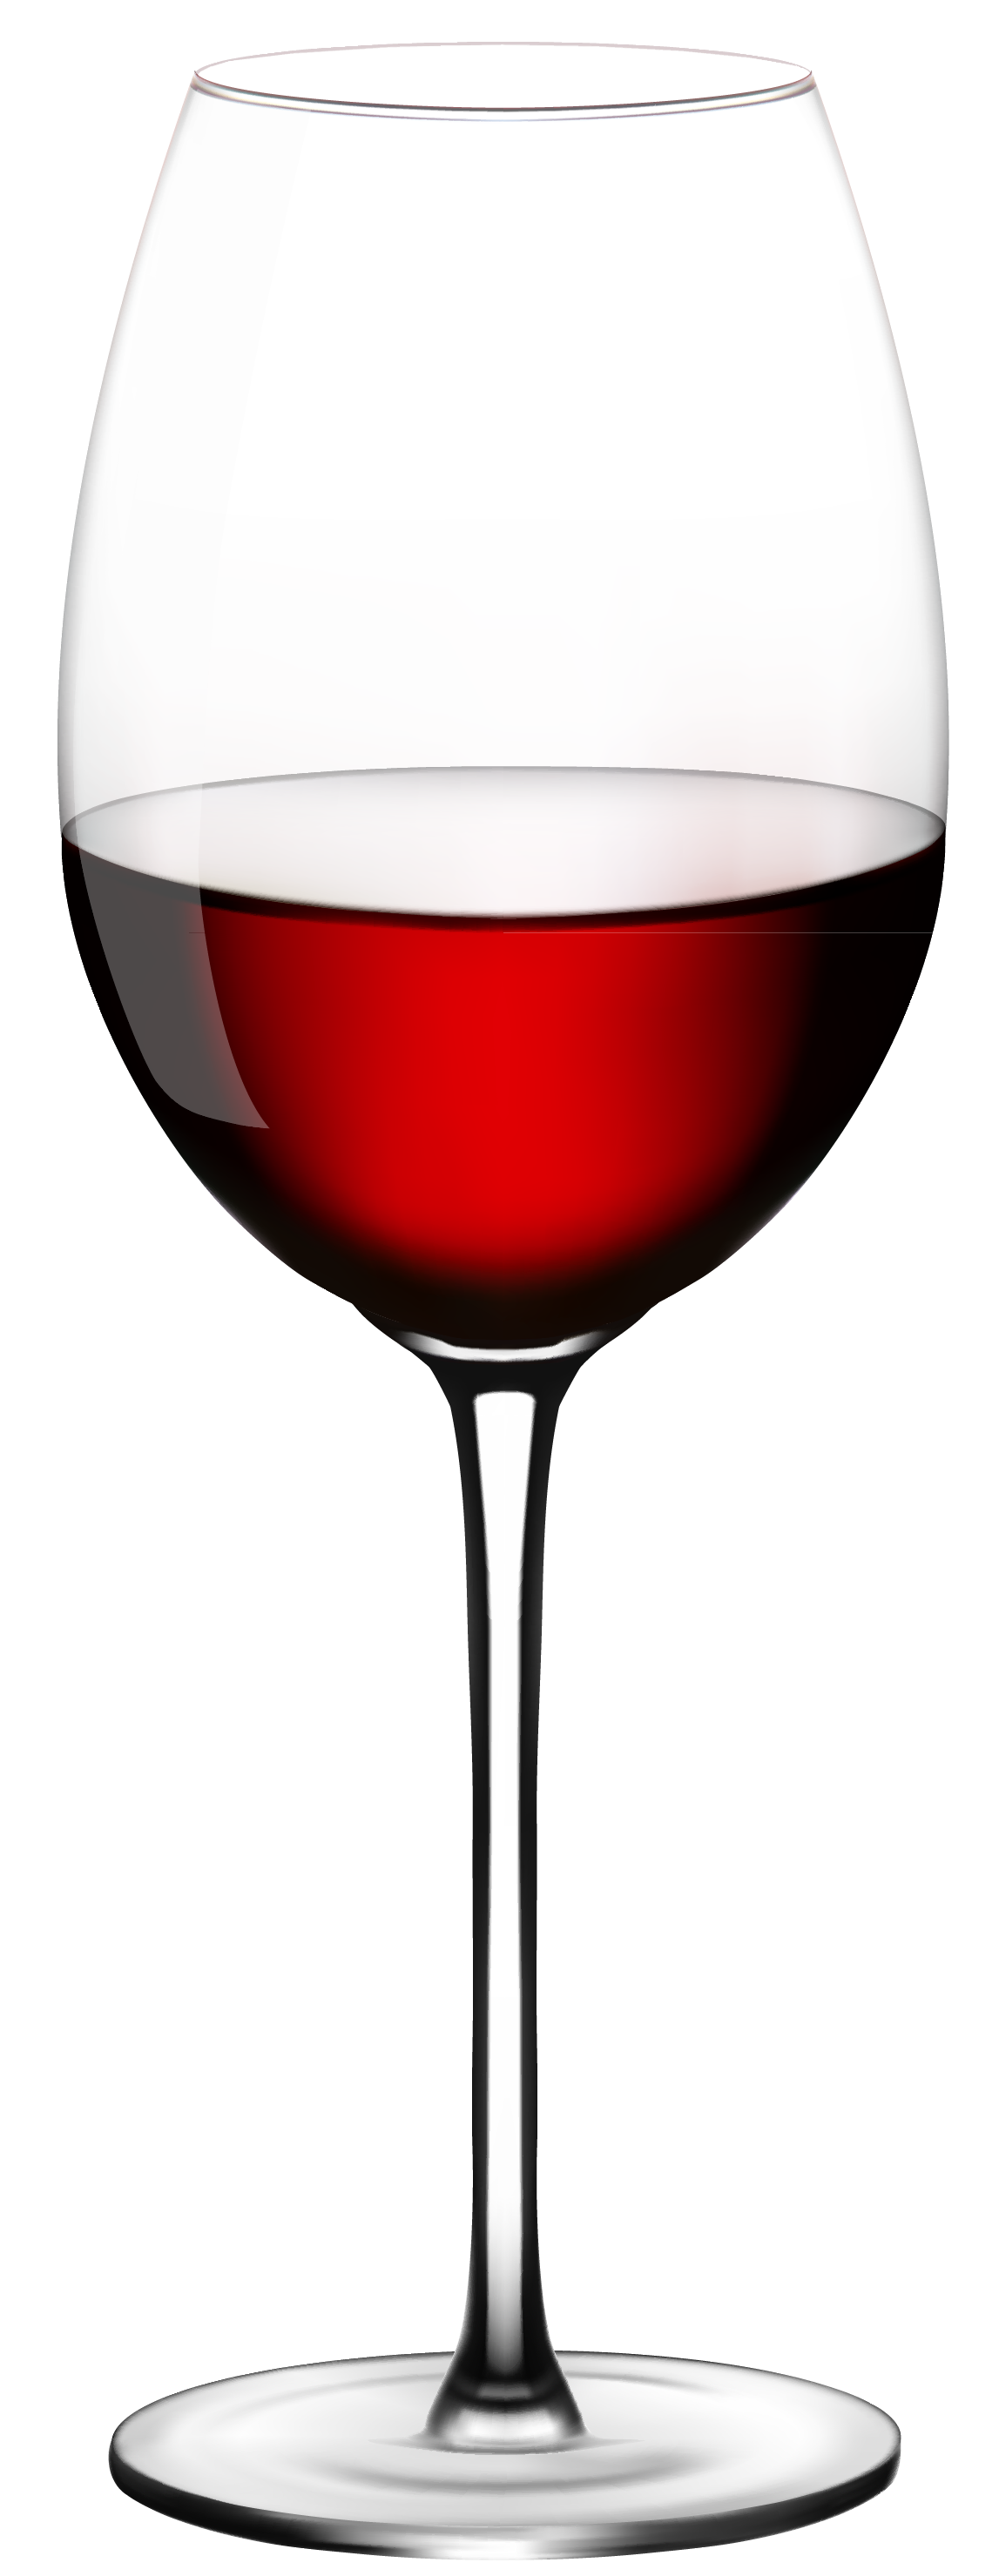 Top Wine Glass Png - Glass, Transparent background PNG HD thumbnail